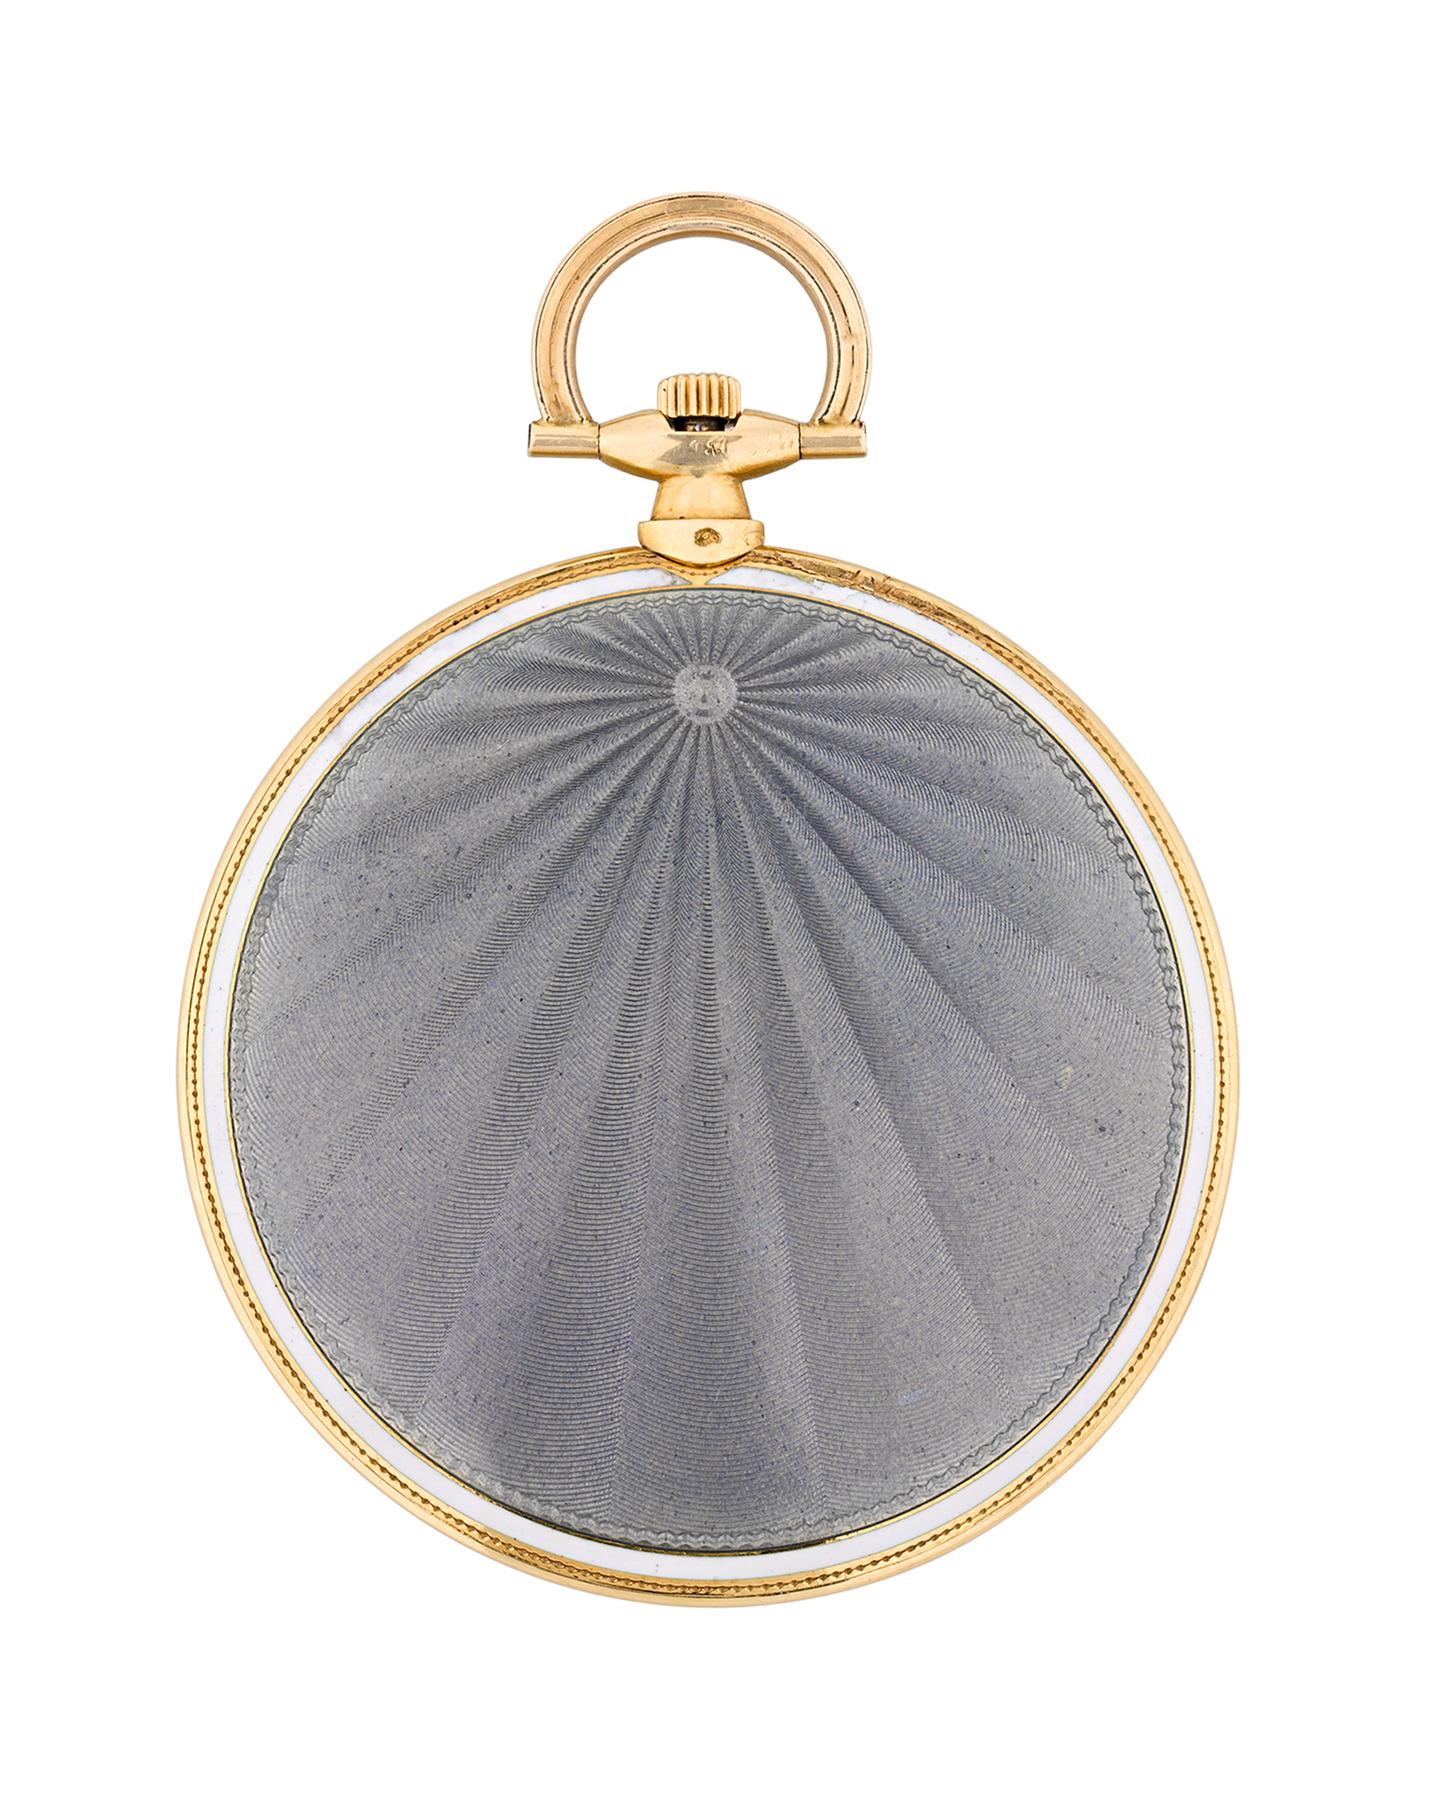 A study in classic Art Deco design, this pocket watch was crafted by the famed Cartier. Housed in an 18K gold open face case, the timepiece boasts a sleek design adorned by light blue guilloche enameling on the reverse. The white face tells the time